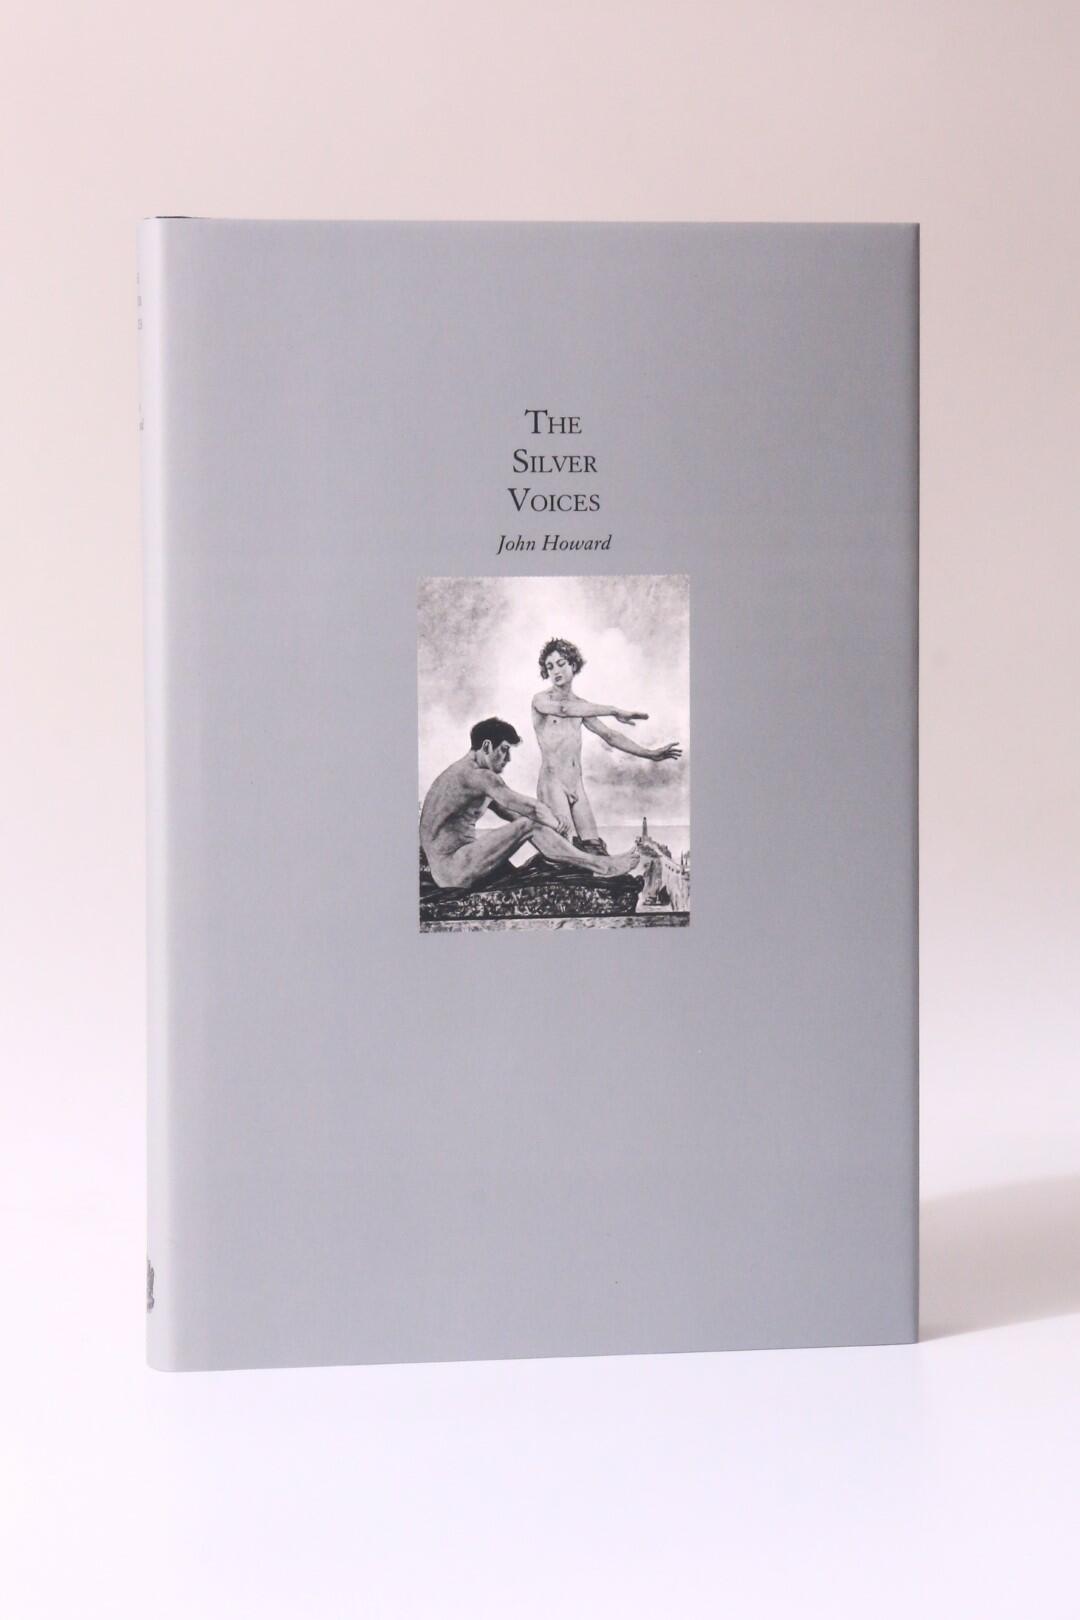 John Howard - The Silver Voices - Ex Occidente Press, 2010, Limited Edition.